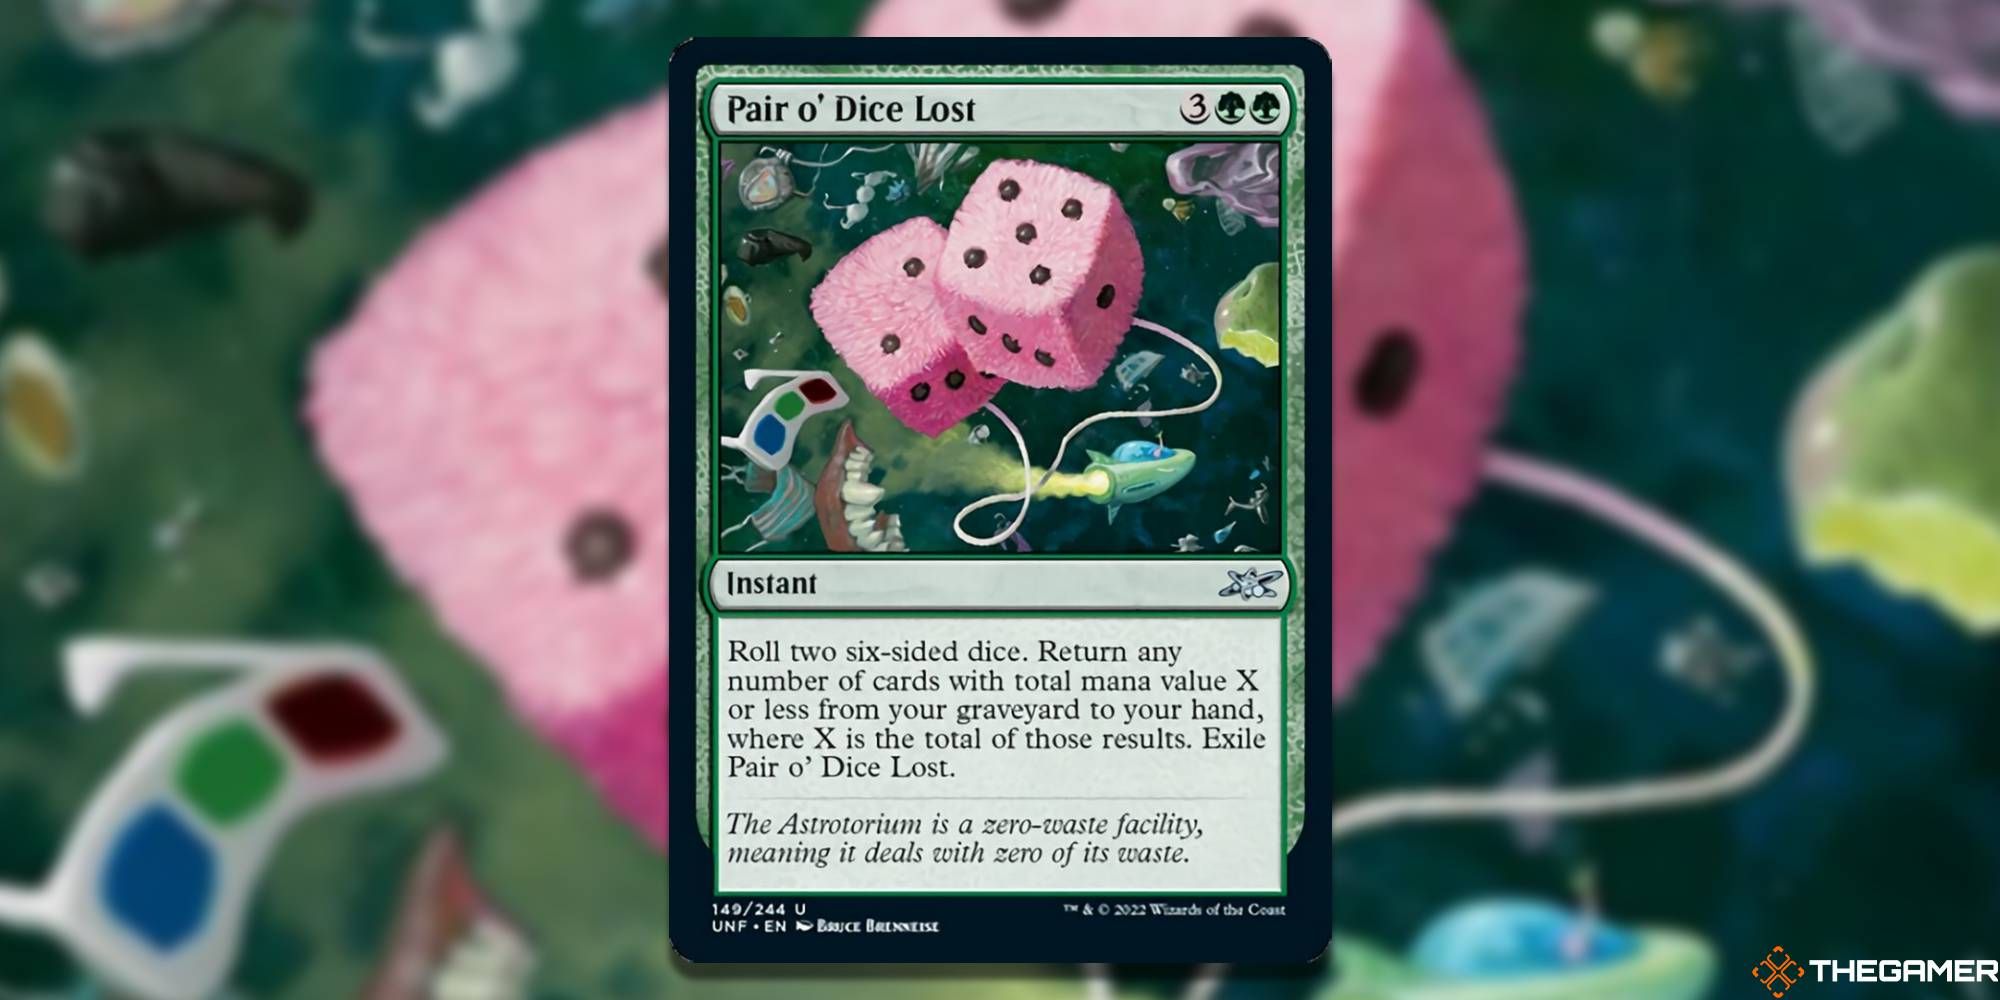 Image of the Pair O Dice Lost card in Magic: The Gathering, with art by Bruce Brenneise